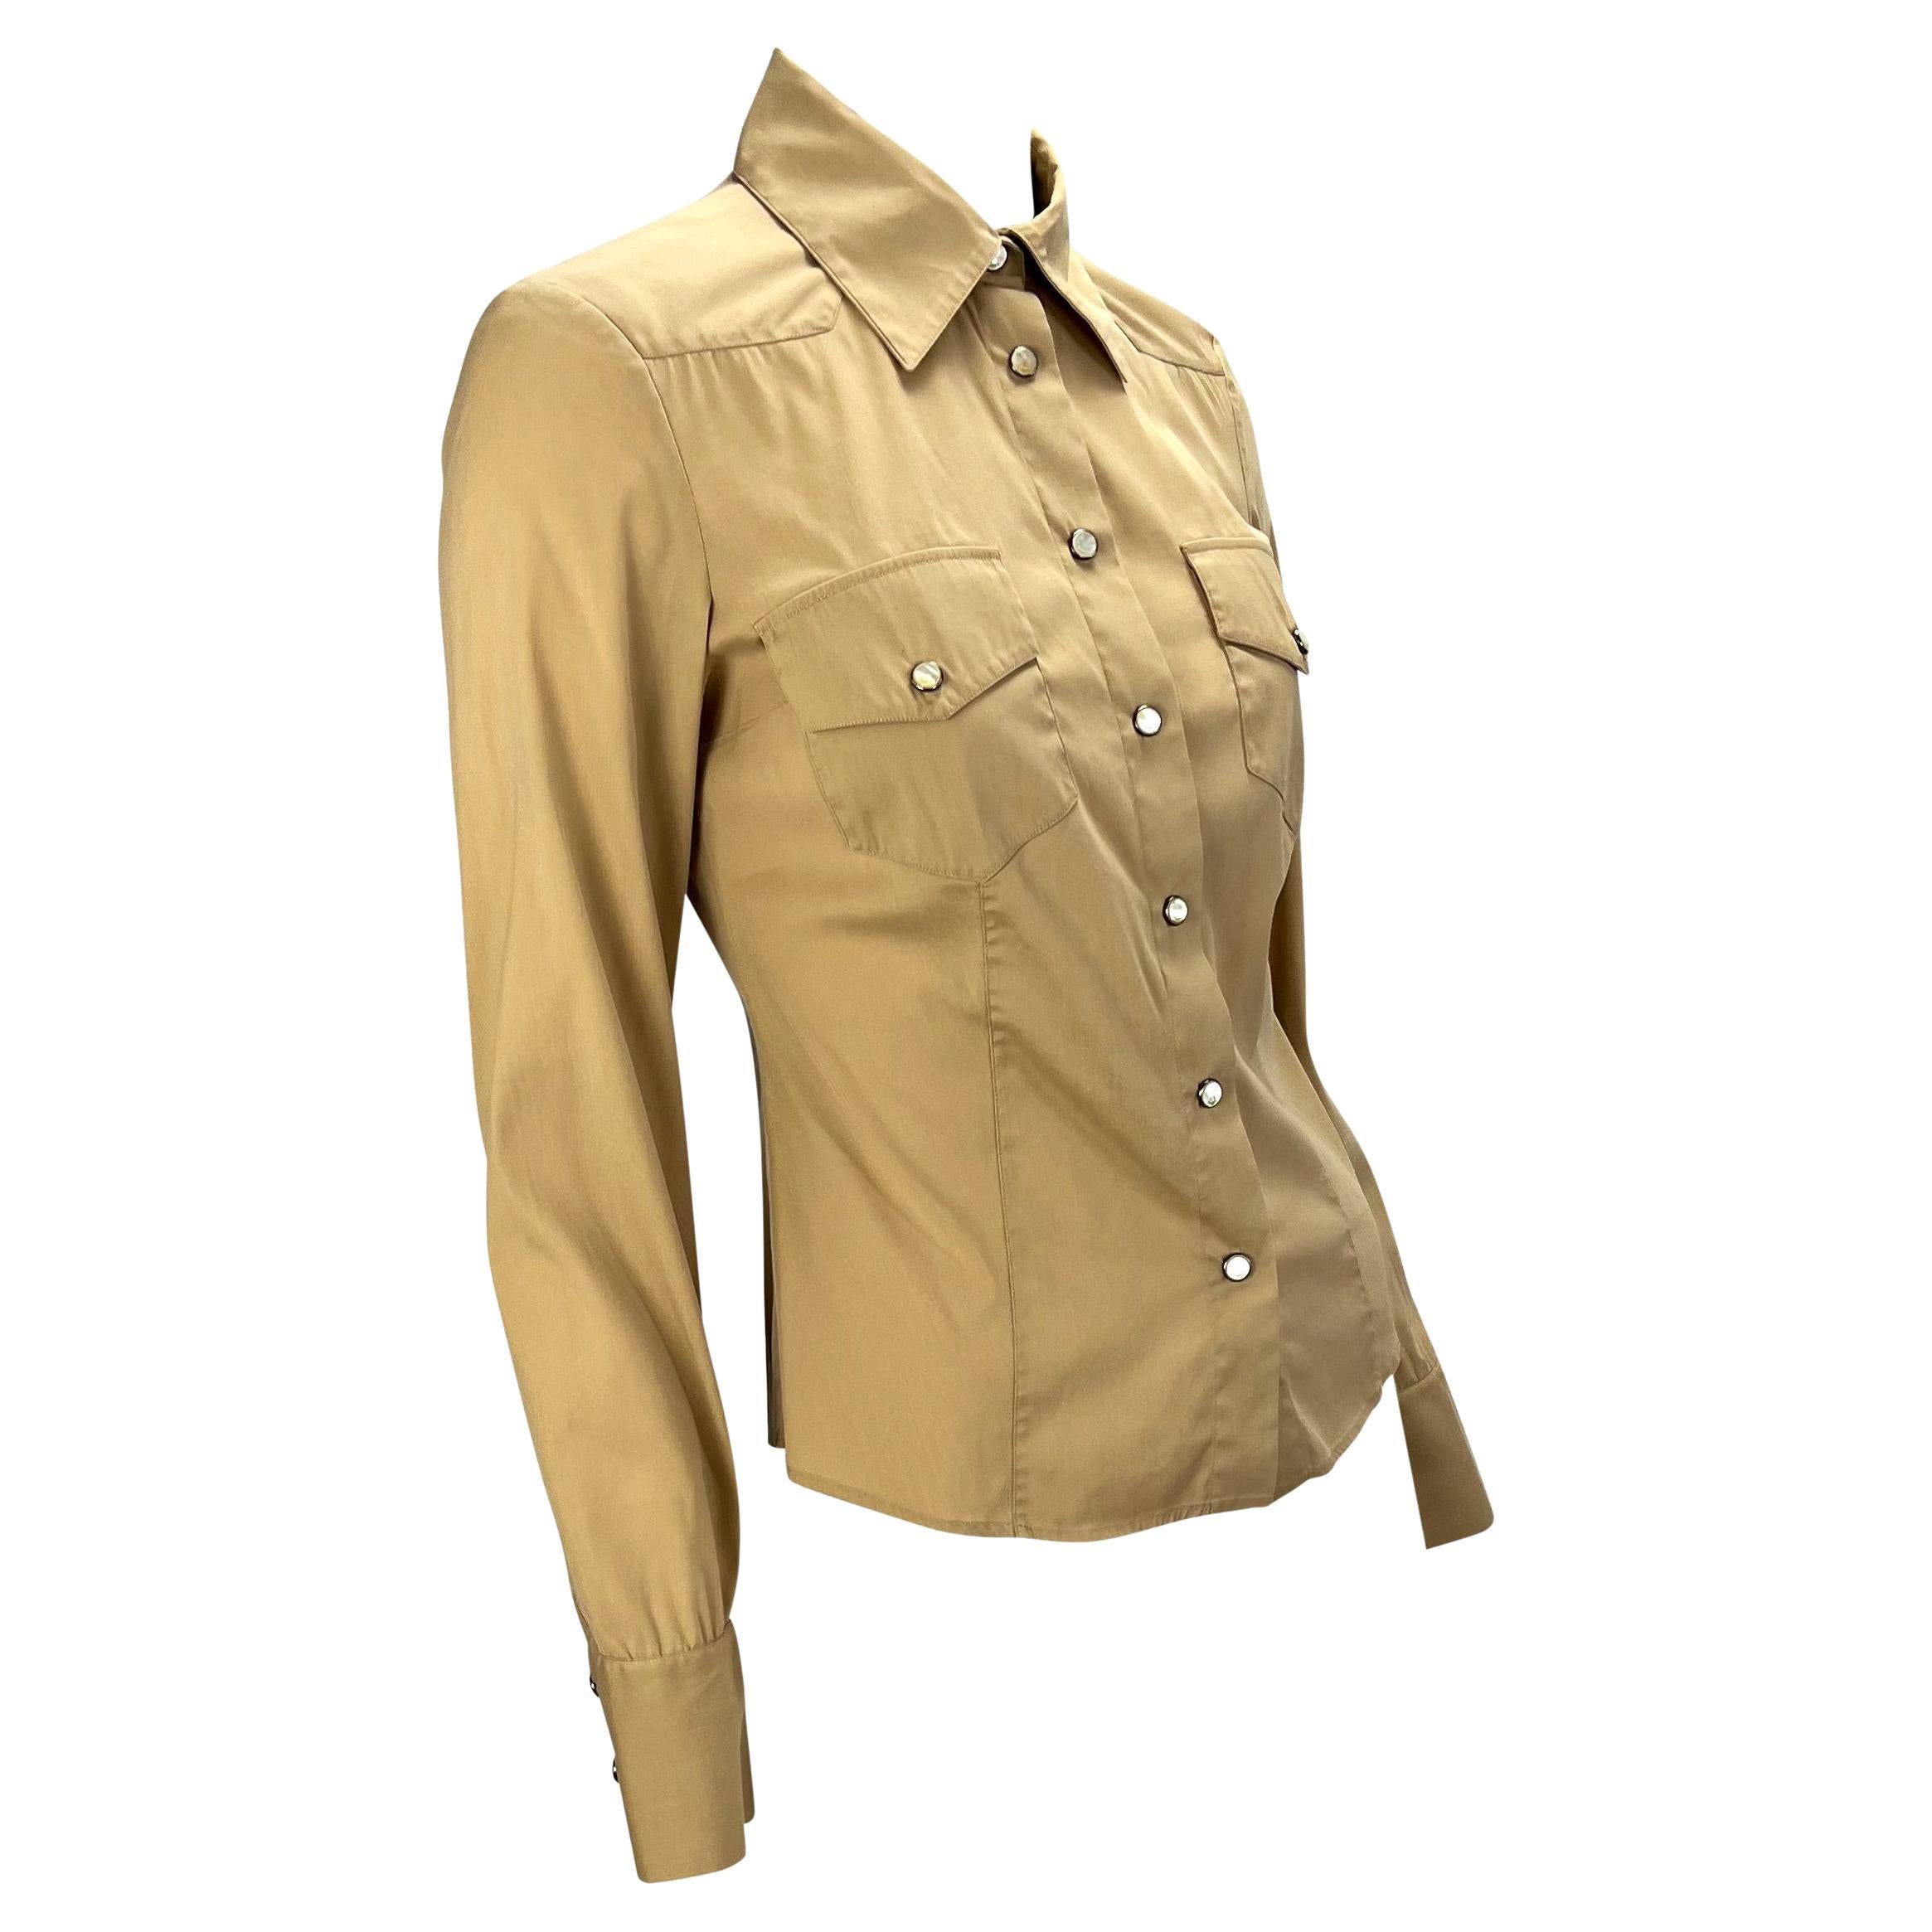 Women's S/S 2002 Gucci by Tom Ford Beige Mother of Pearl Snap Collared Stretch Shirt 